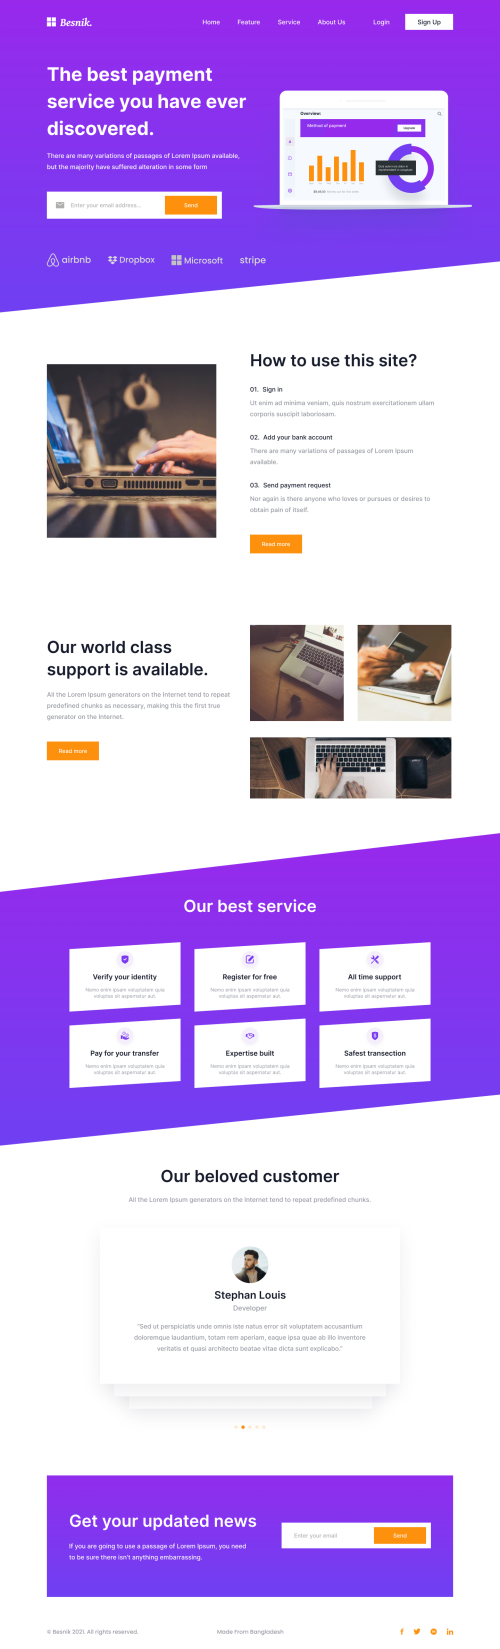 UIHut - Payment Landing Page Template - 8104